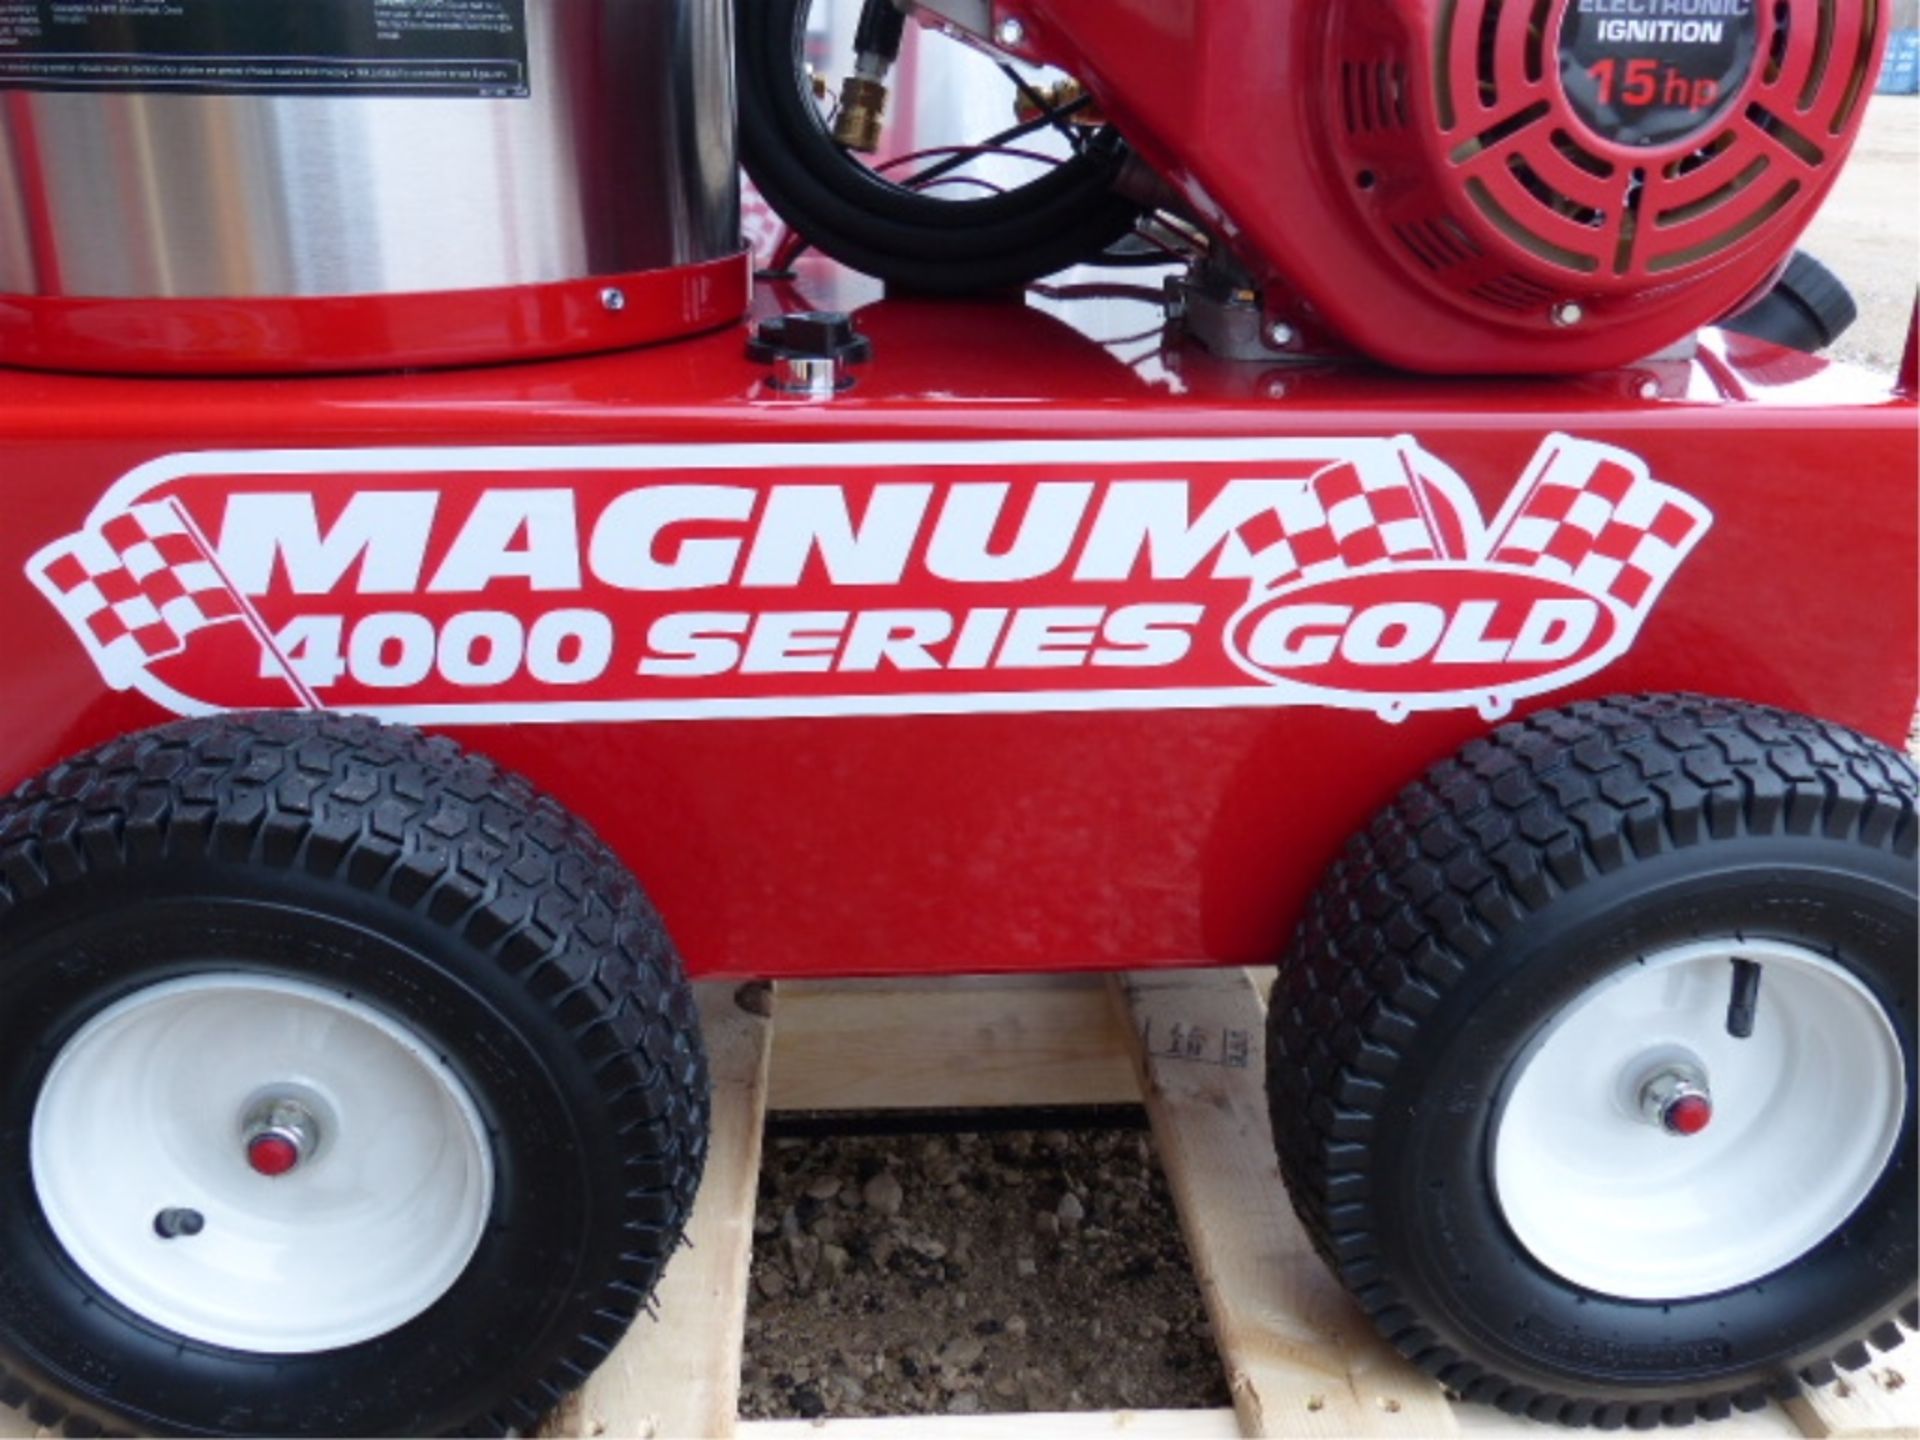 EASY-KLEEN MAGNUM 4000 GOLD HOT WATER PRESSURE WASHER - Image 5 of 10